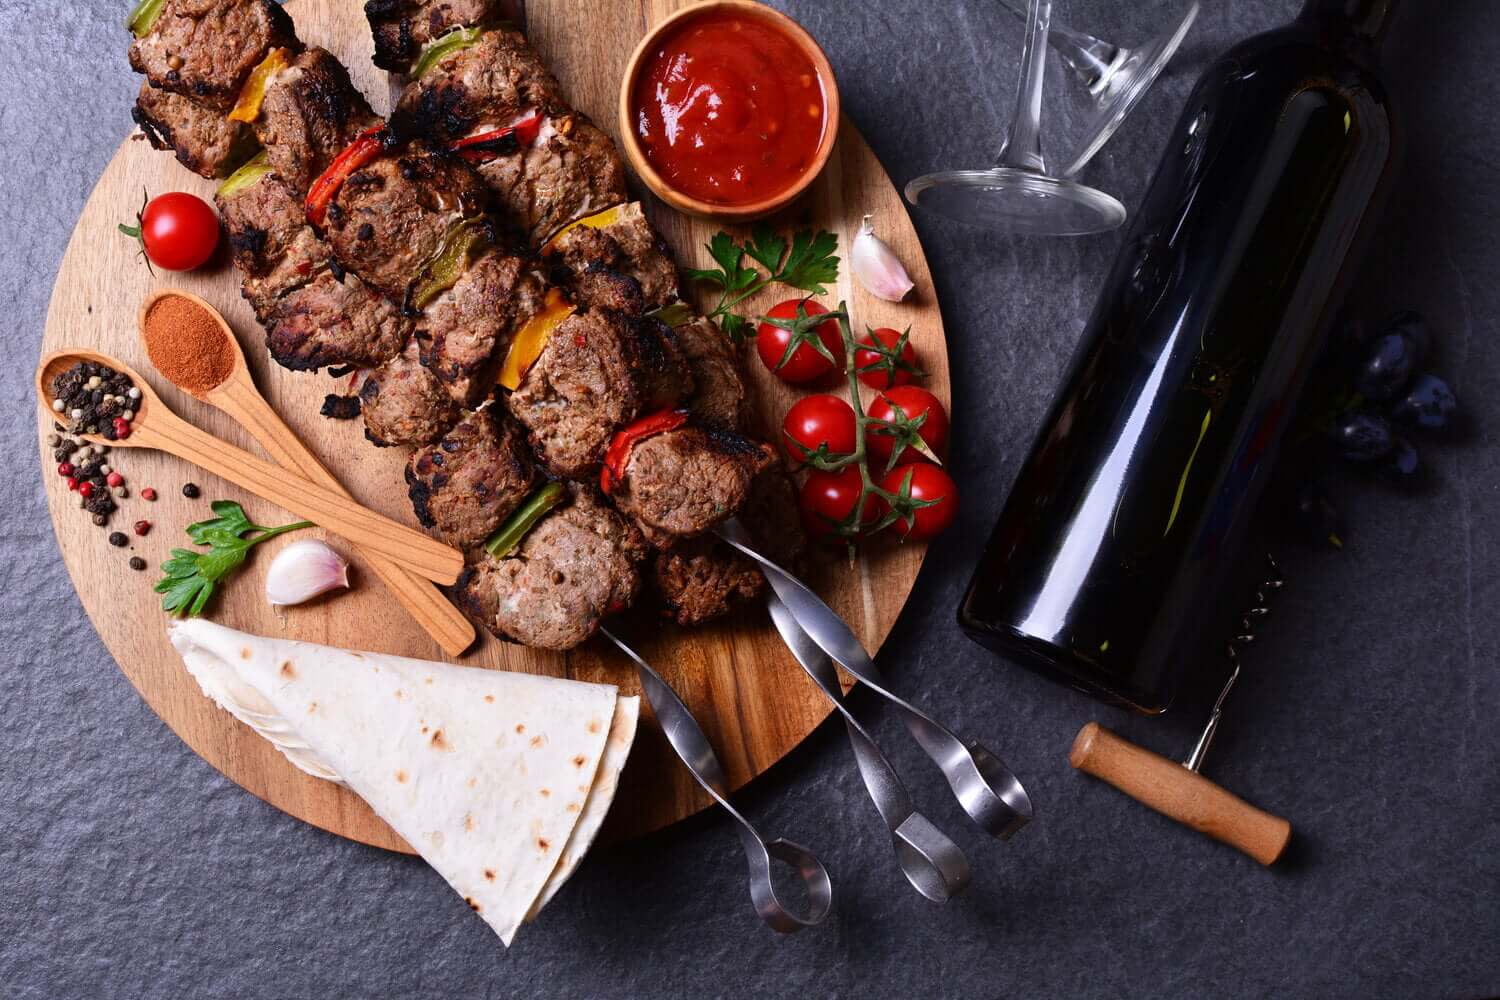 Petit Verdot goes perfect with grilled meat